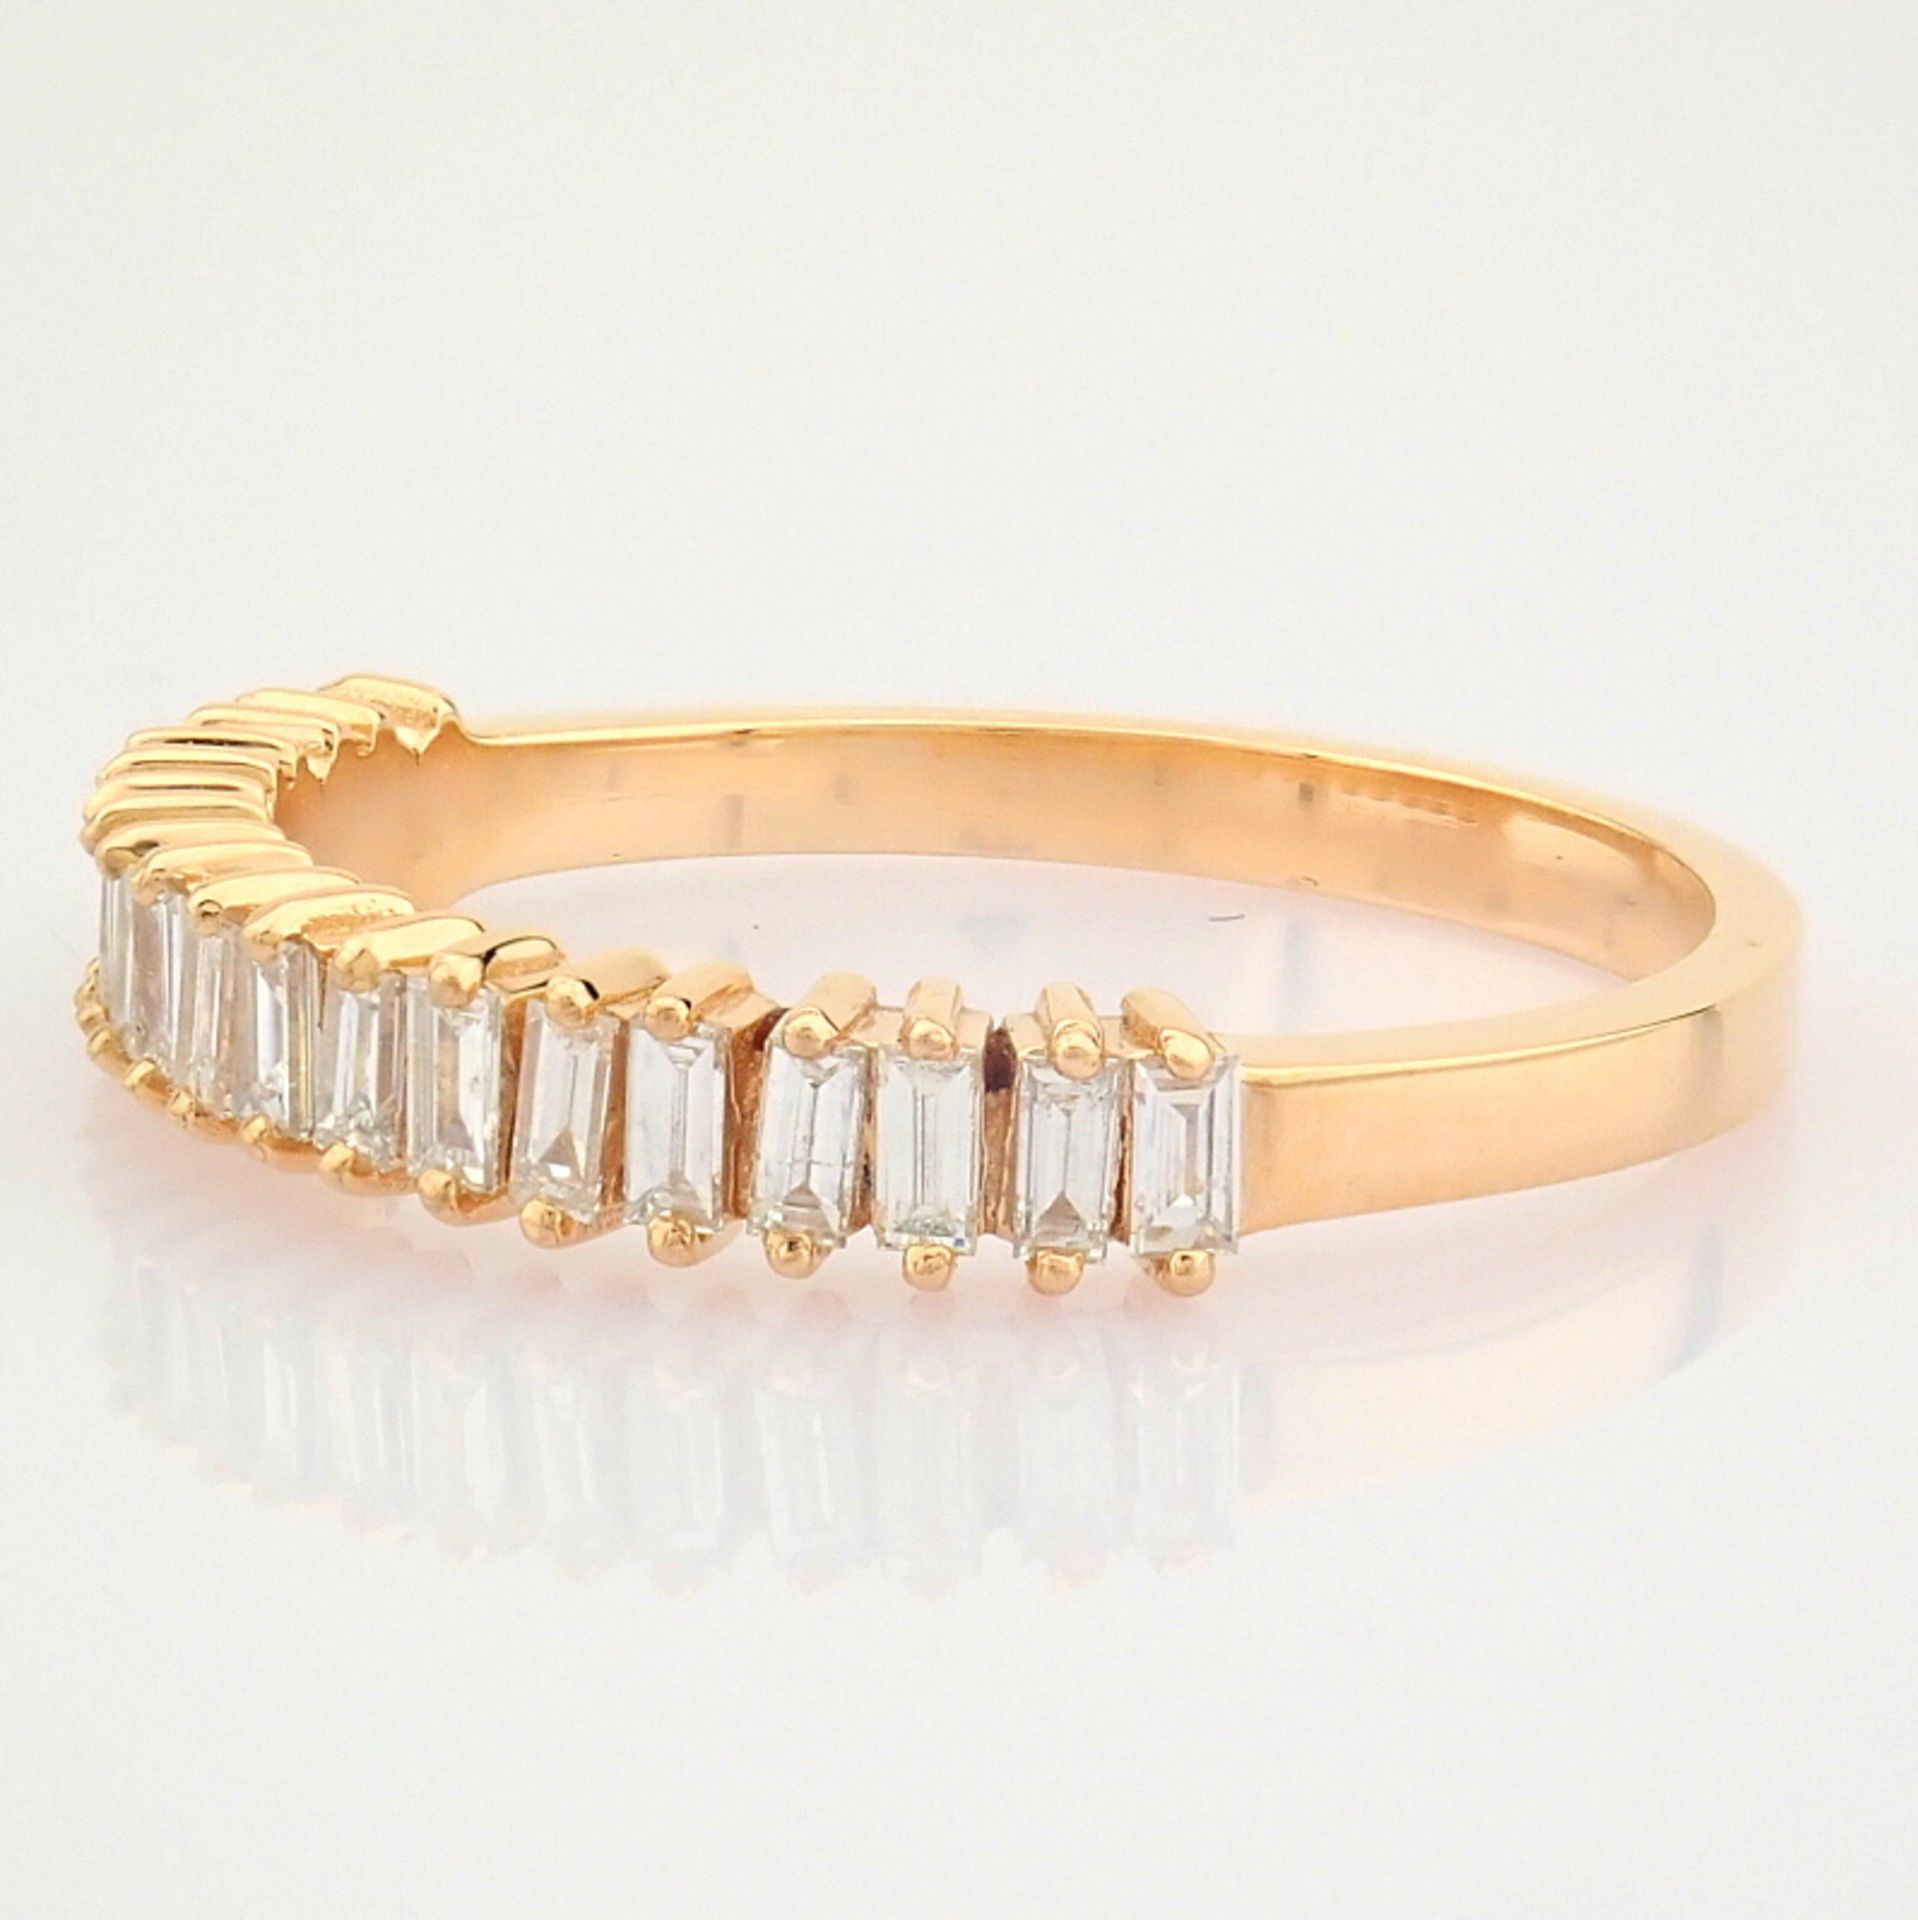 Certificated 14K Rose/Pink Gold Baguette Diamond Ring (Total 0.44 ct Stone) - Image 5 of 7